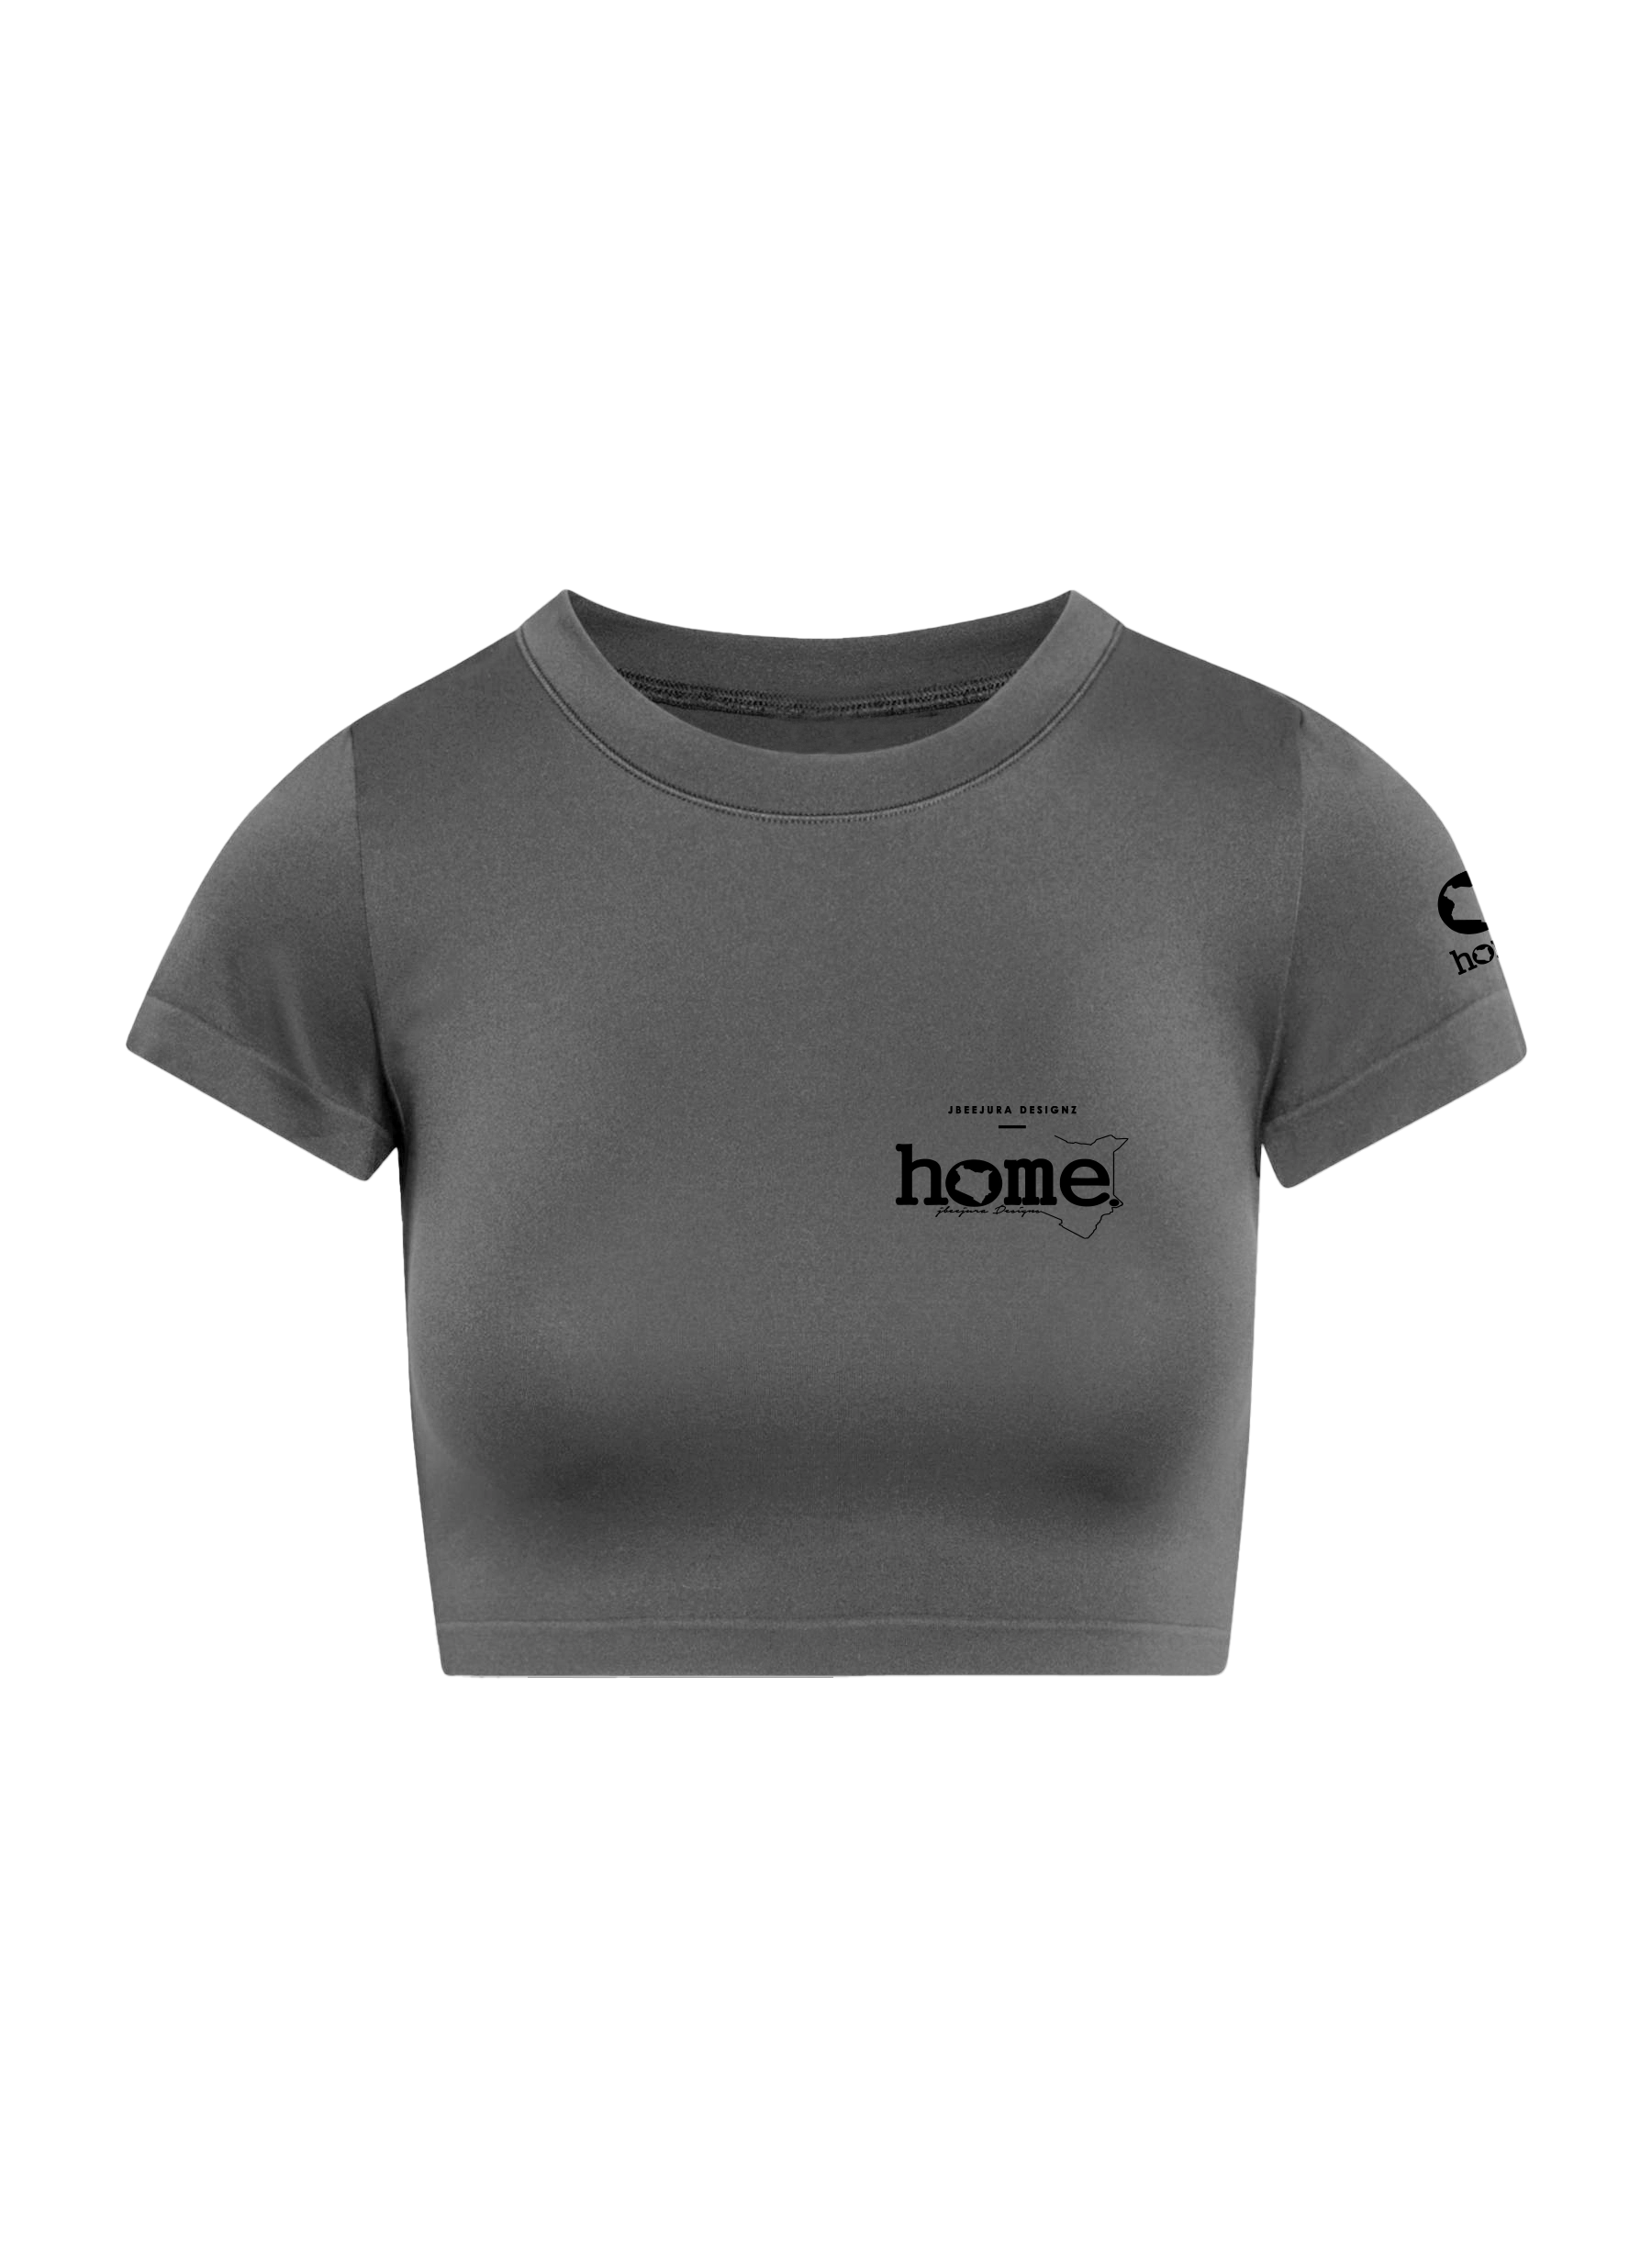 home_254 SHORT SLEEVED SAGE CROPPED ARIA TEE WITH A BLACK 3D WORDS PRINT 